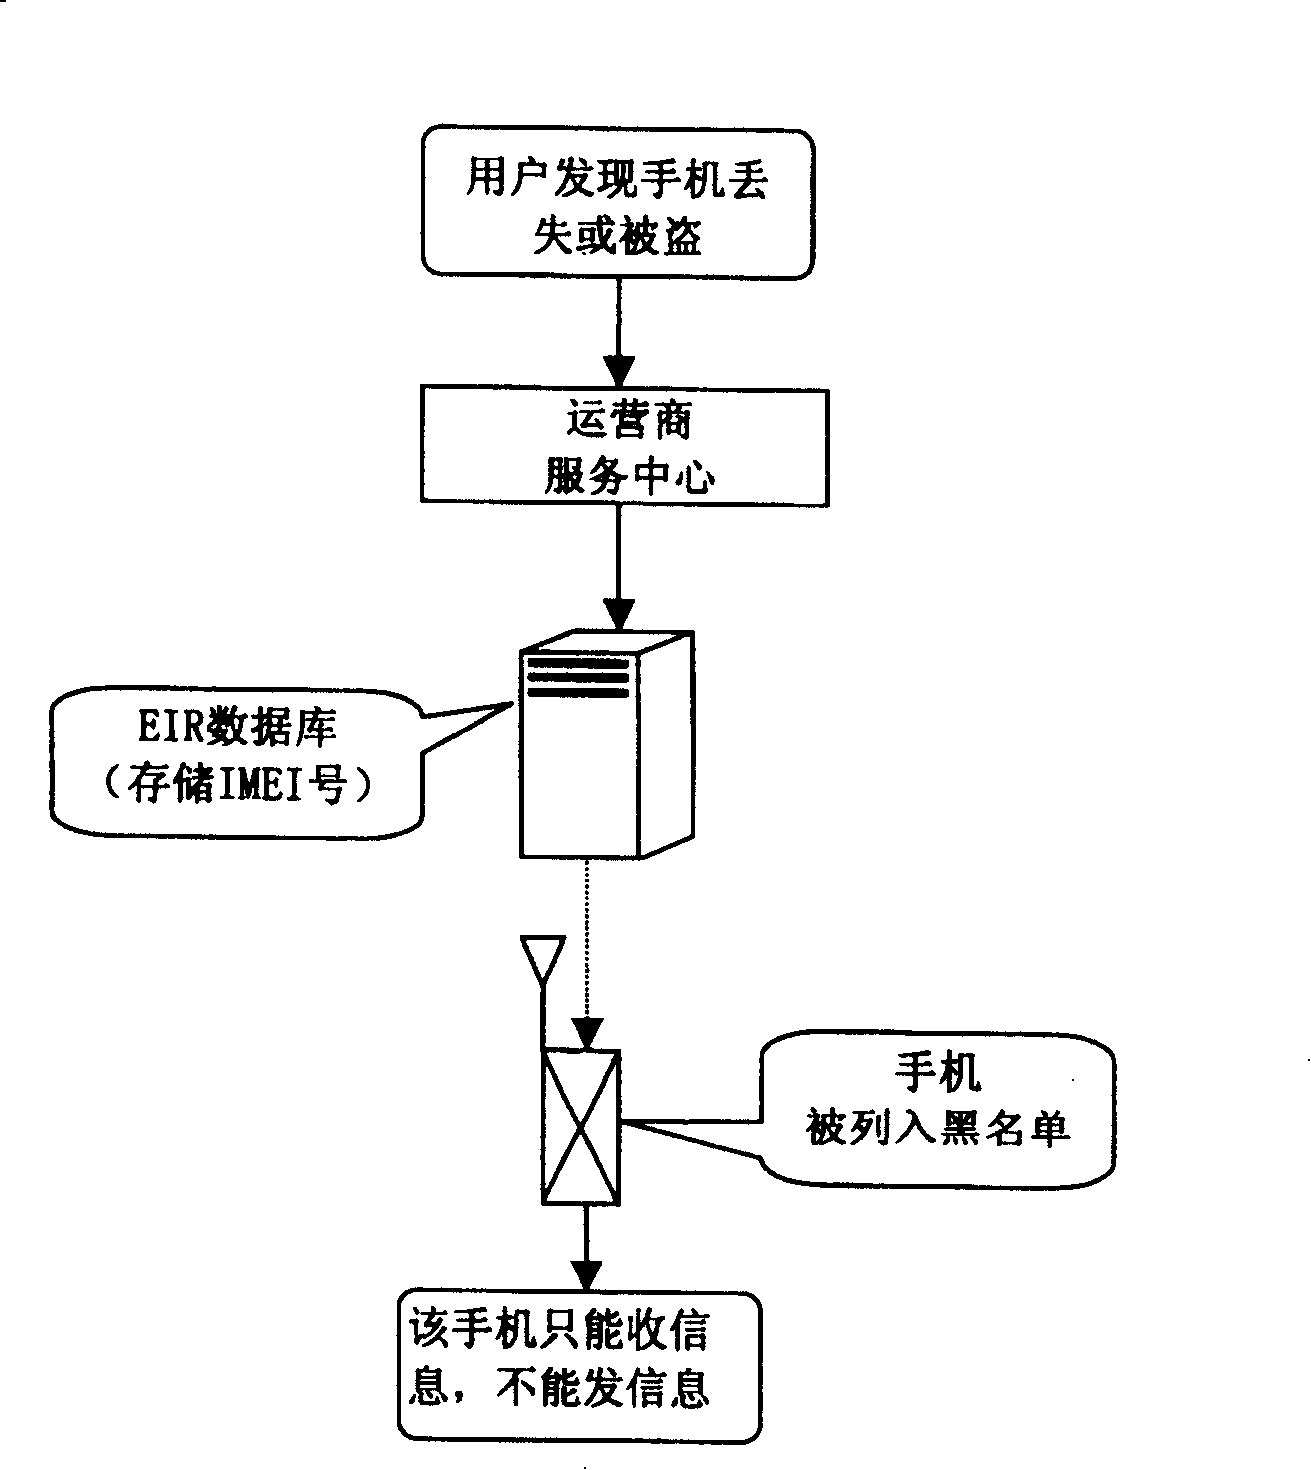 Protection method and system for preventing fraudulent use of mobile terminal